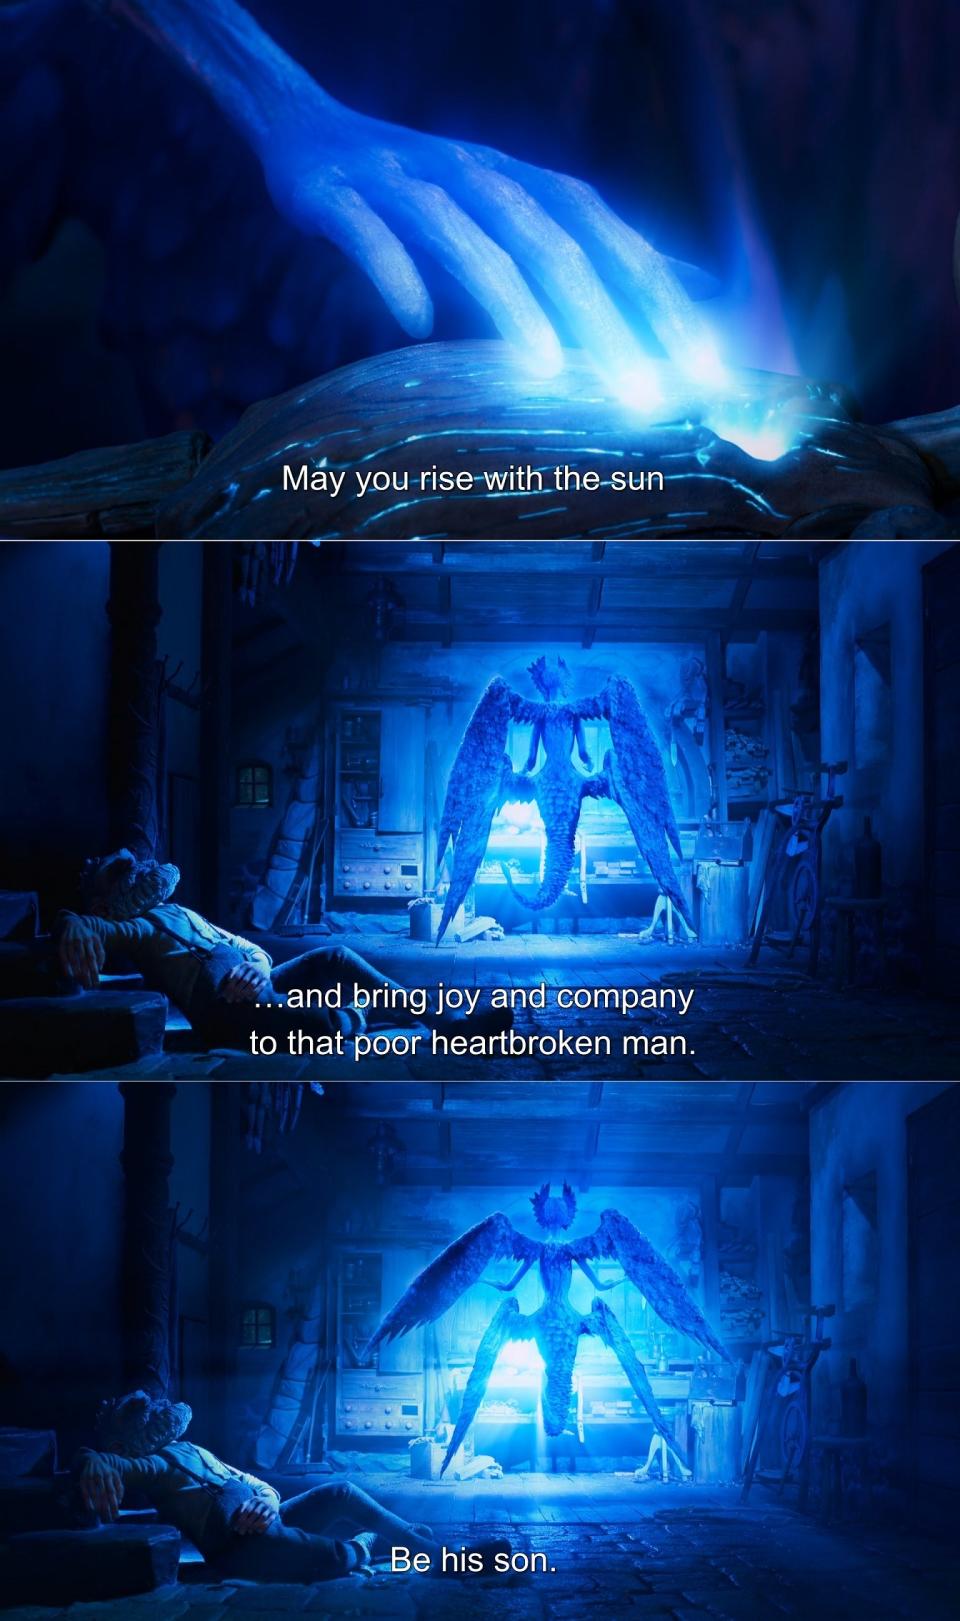 a blue fairy infuses life energy in a wooden puppet while a drunk old man sleeps nearby